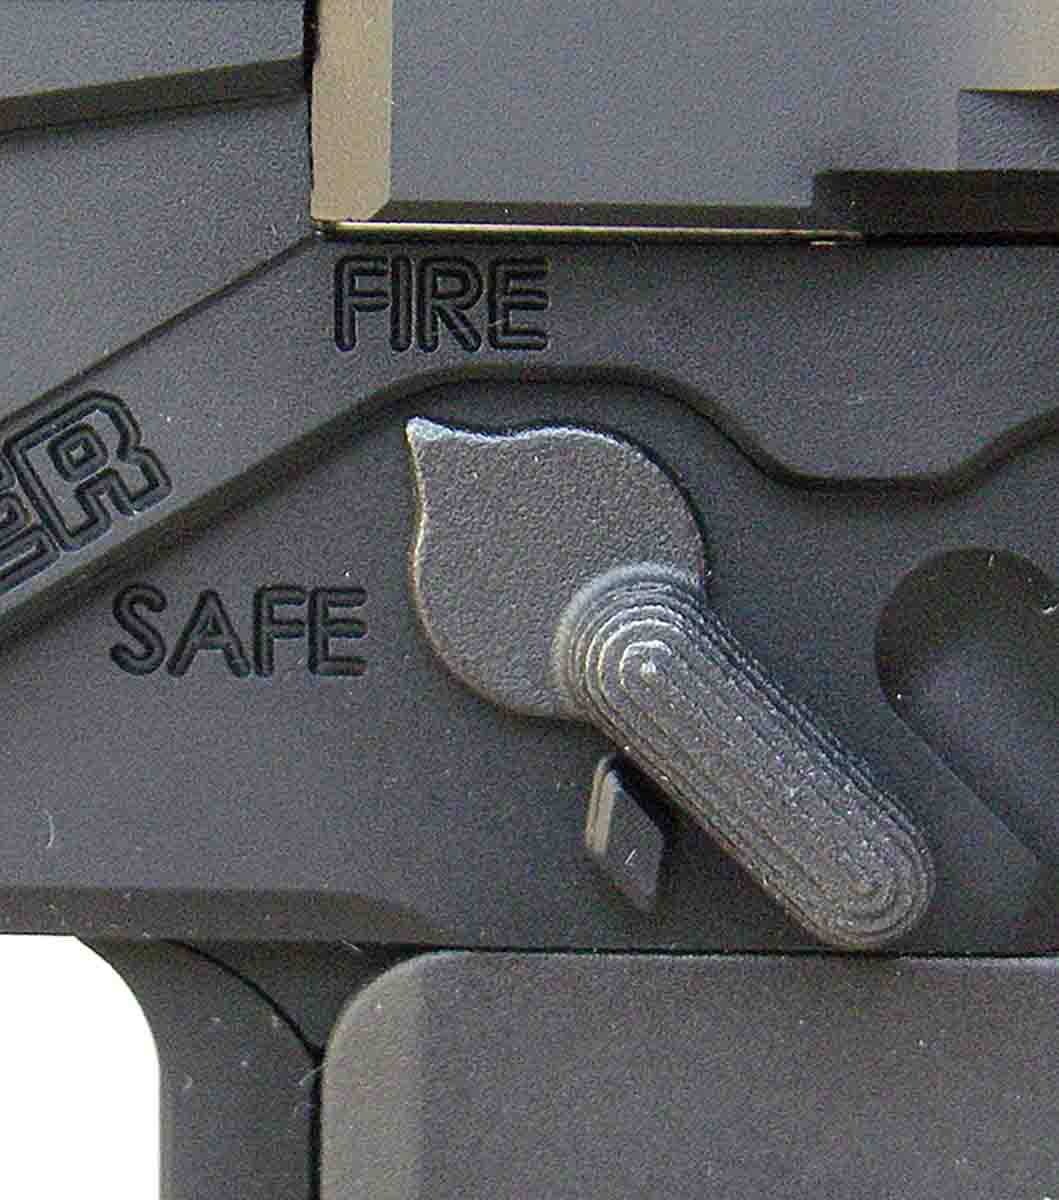 Although the safety is operated from the left side of the receiver and is similar to the AR-15, its position can also be seen from the right side.